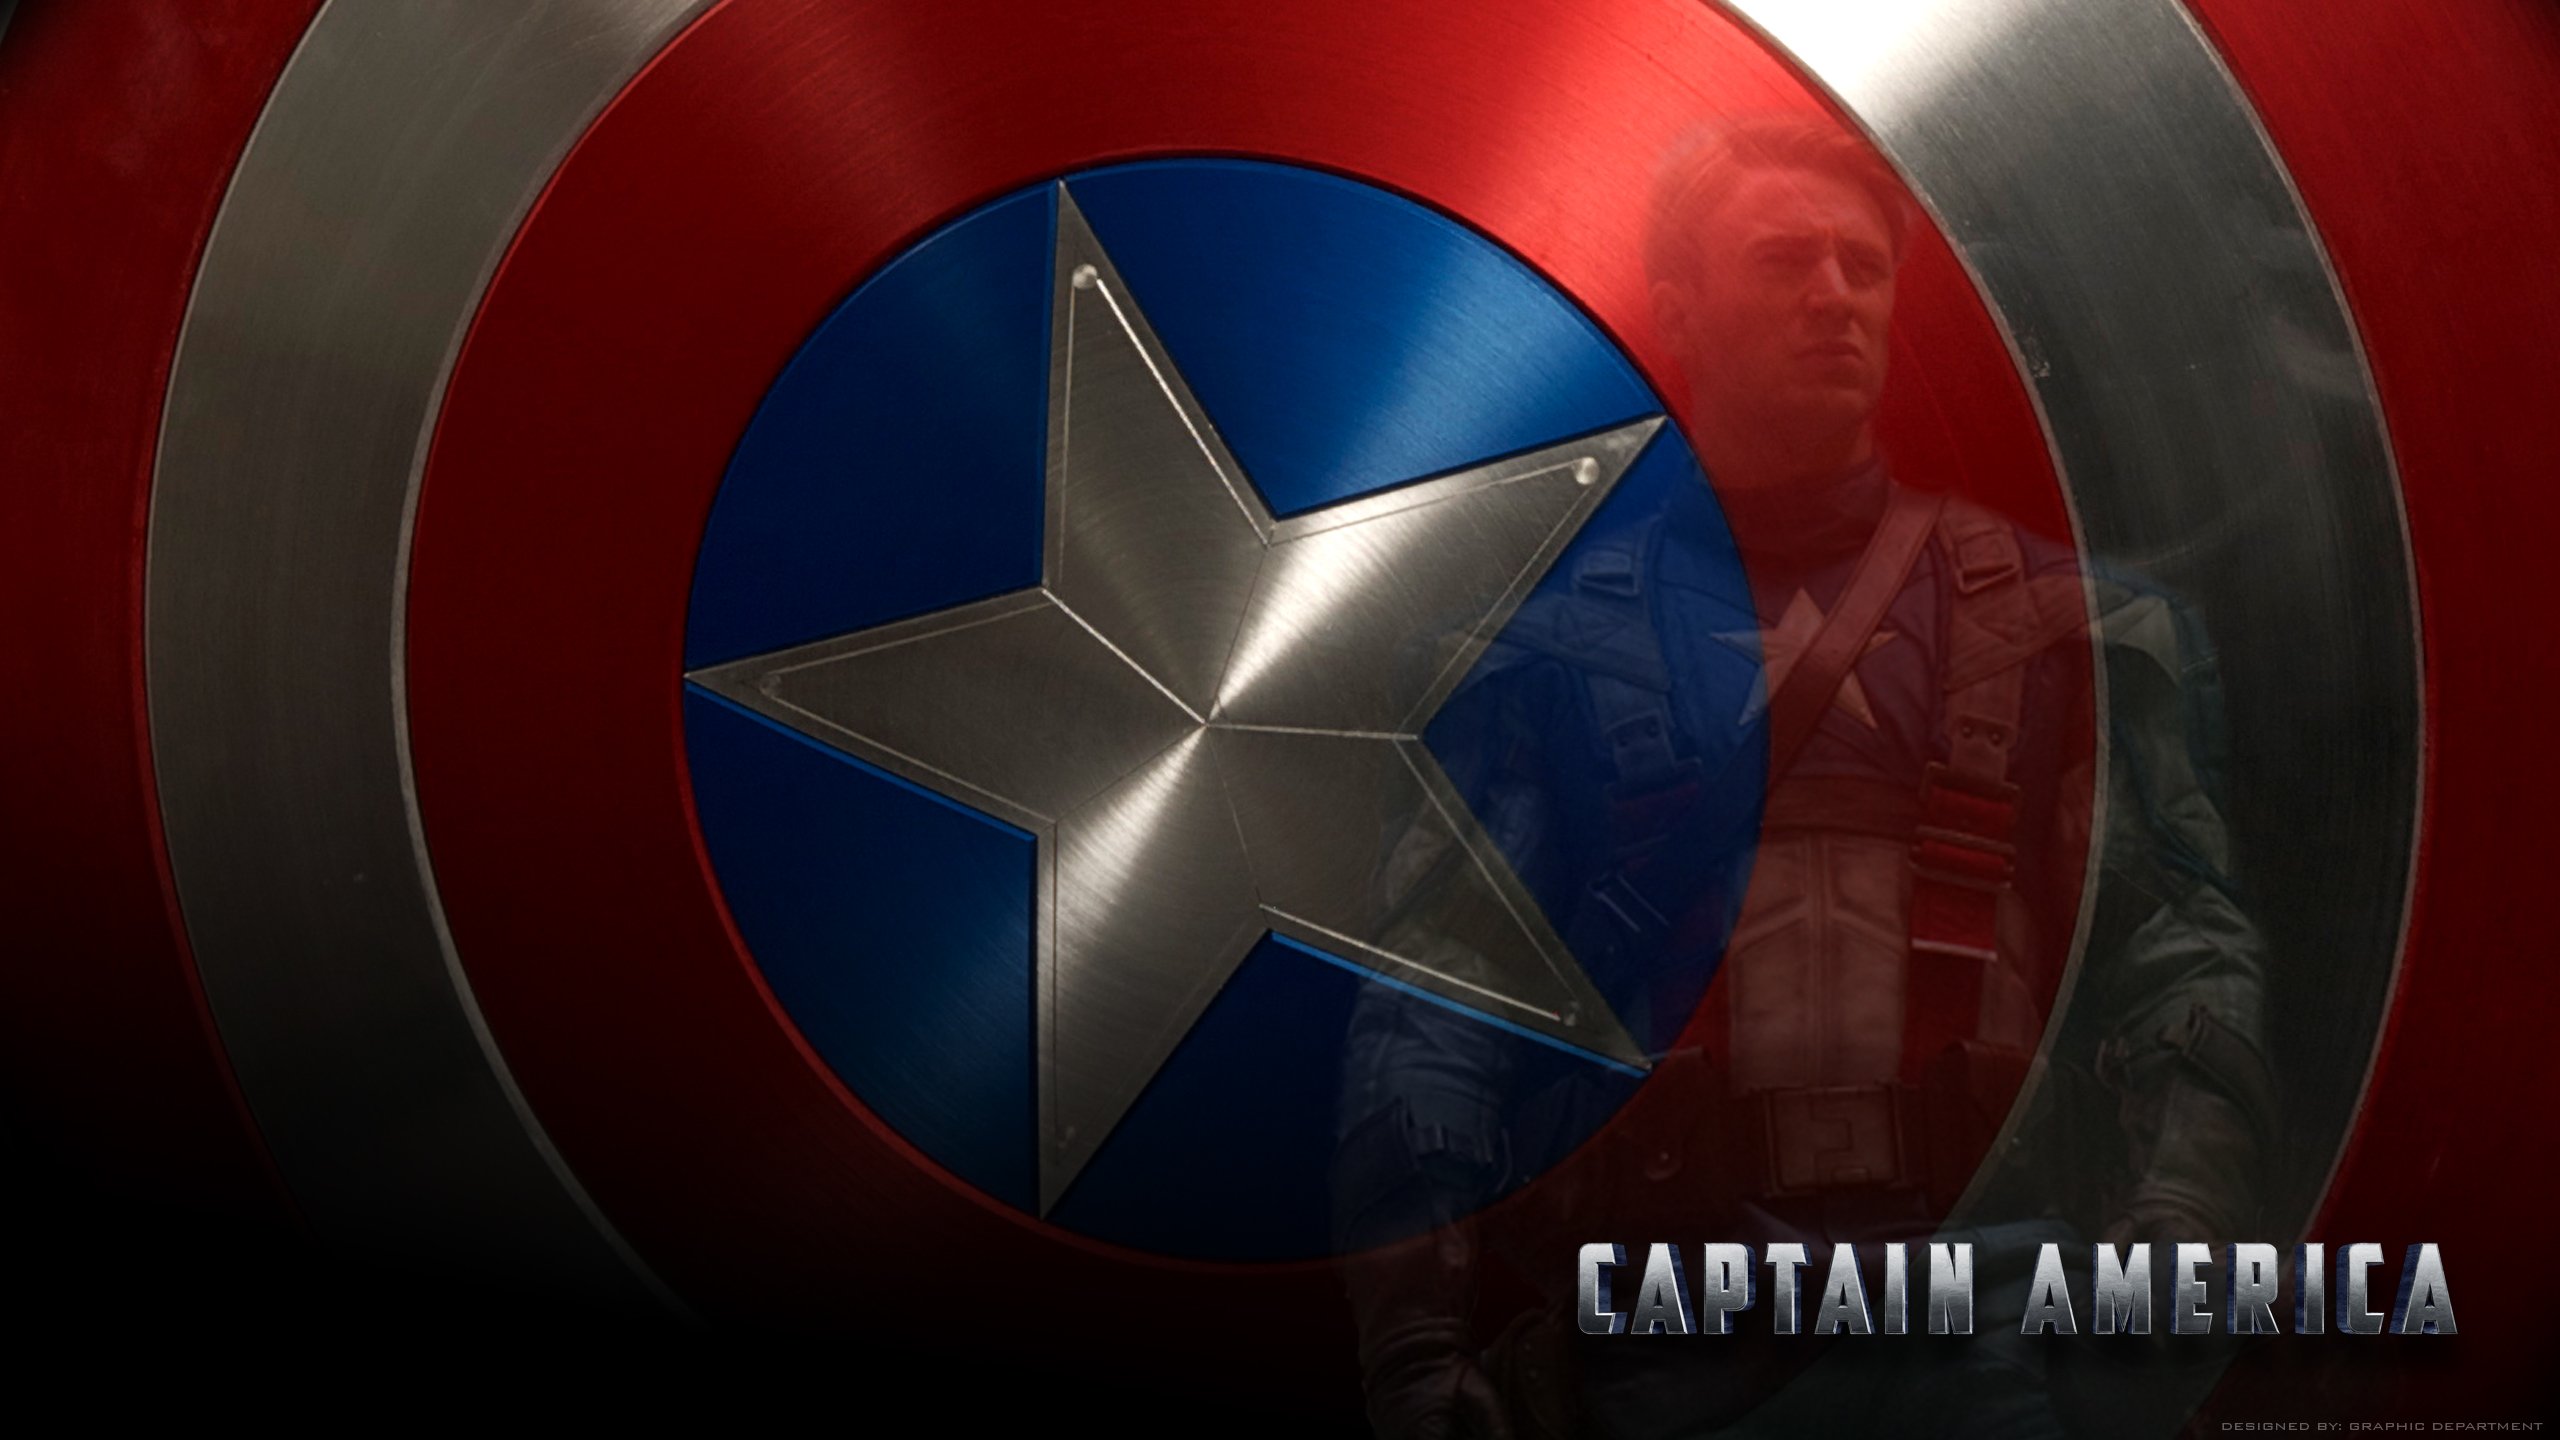 Free download Captain America Wallpaper Awesome Wallpaper